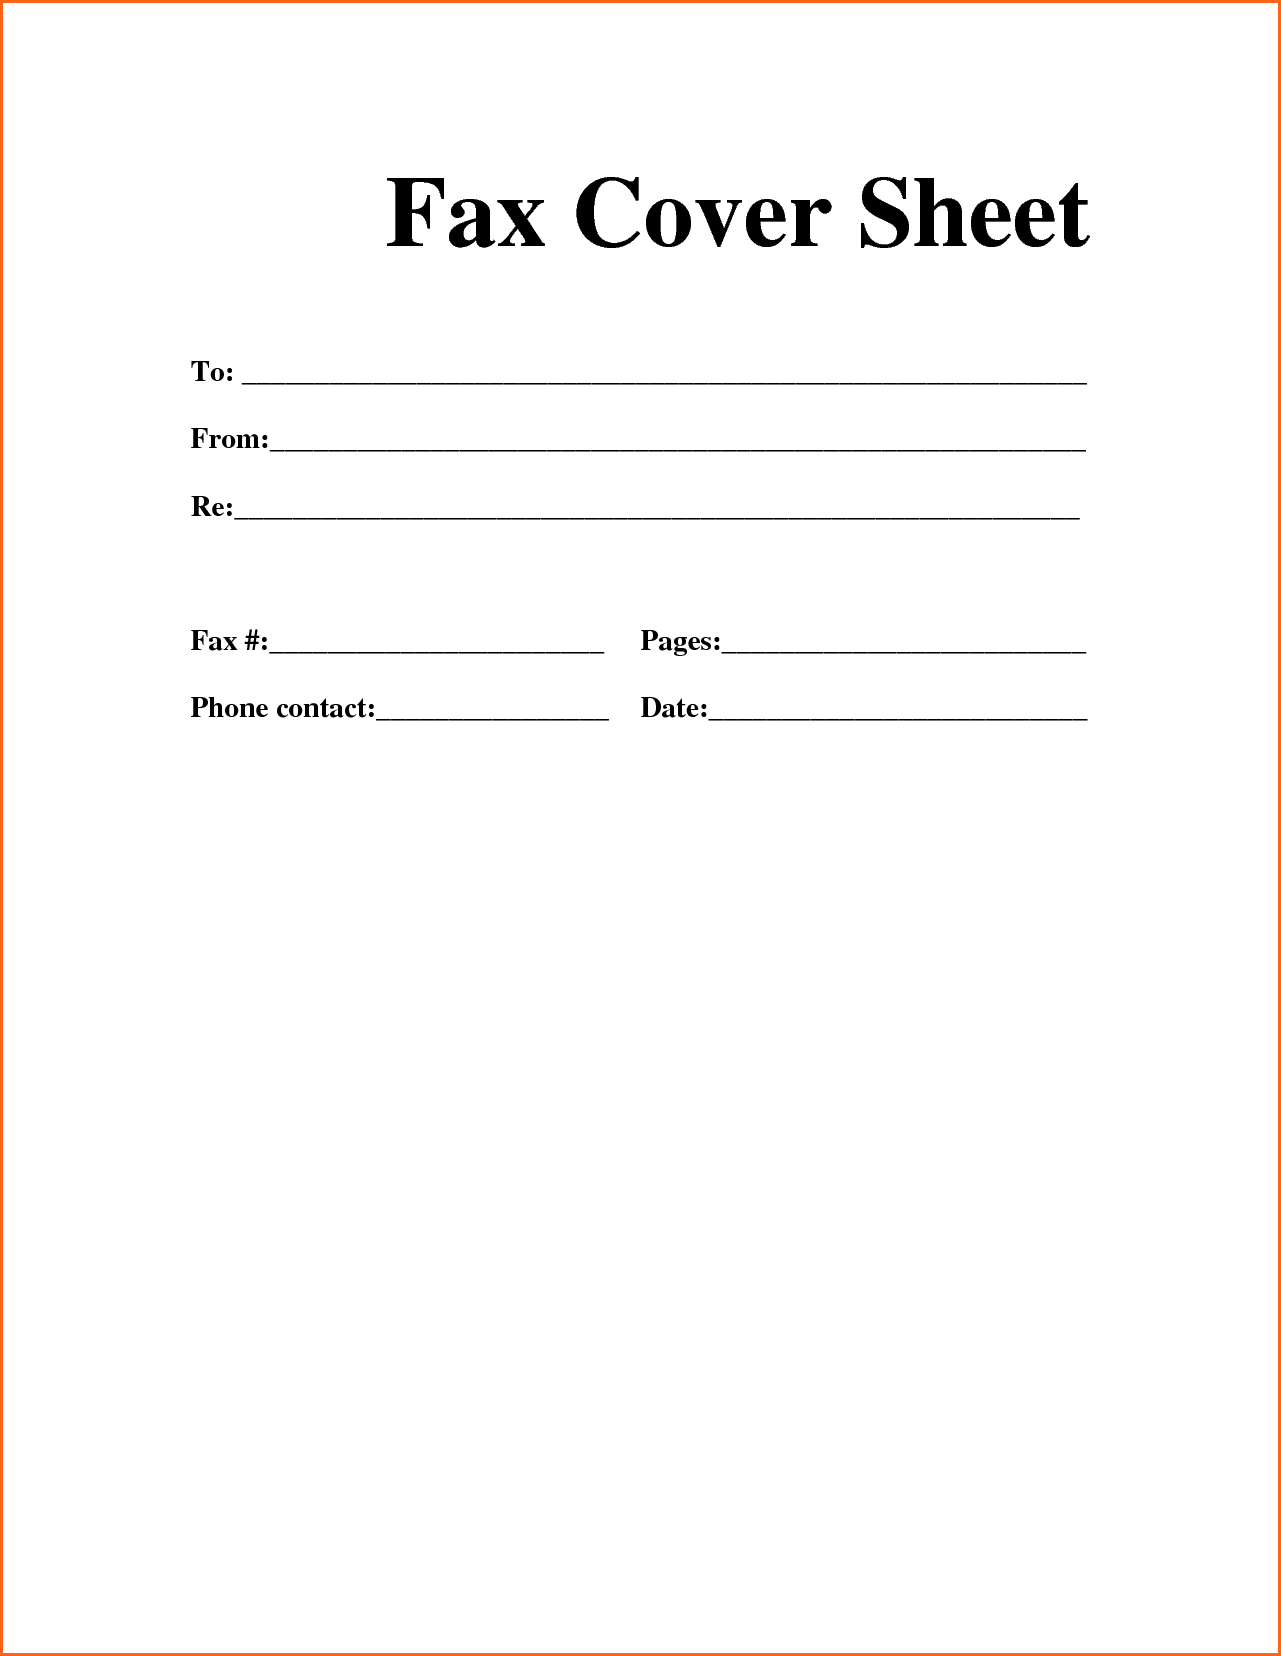 Printable Fax Cover Sheet - Free Fax Cover Sheet Template Printable - Free Printable Fax Cover Sheet